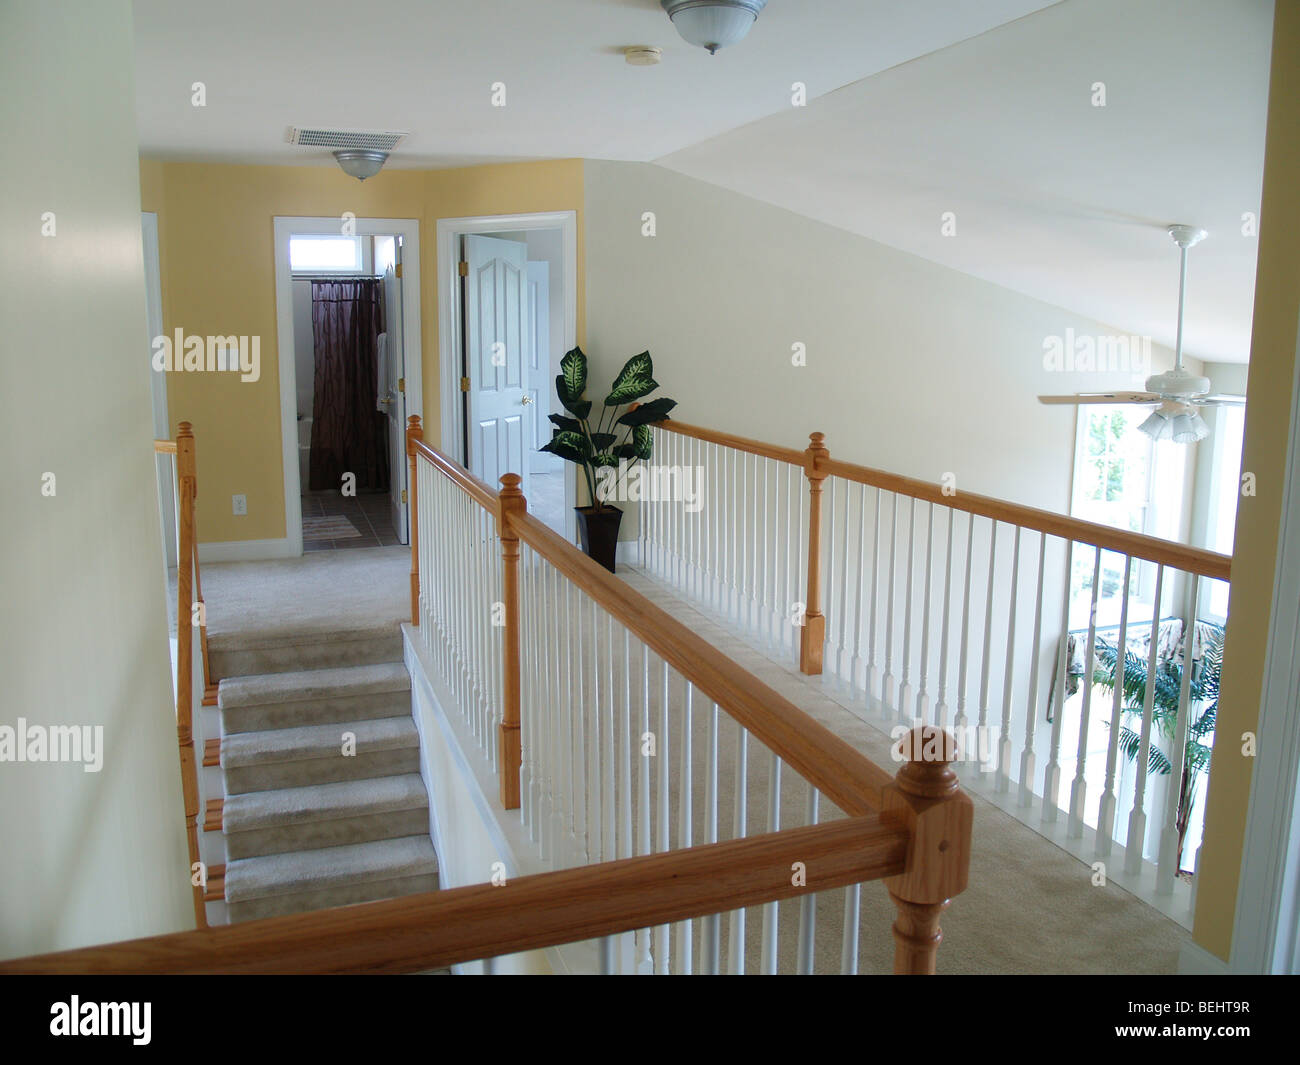 View from an interior balcony of the landing overlooking the family room Stock Photo